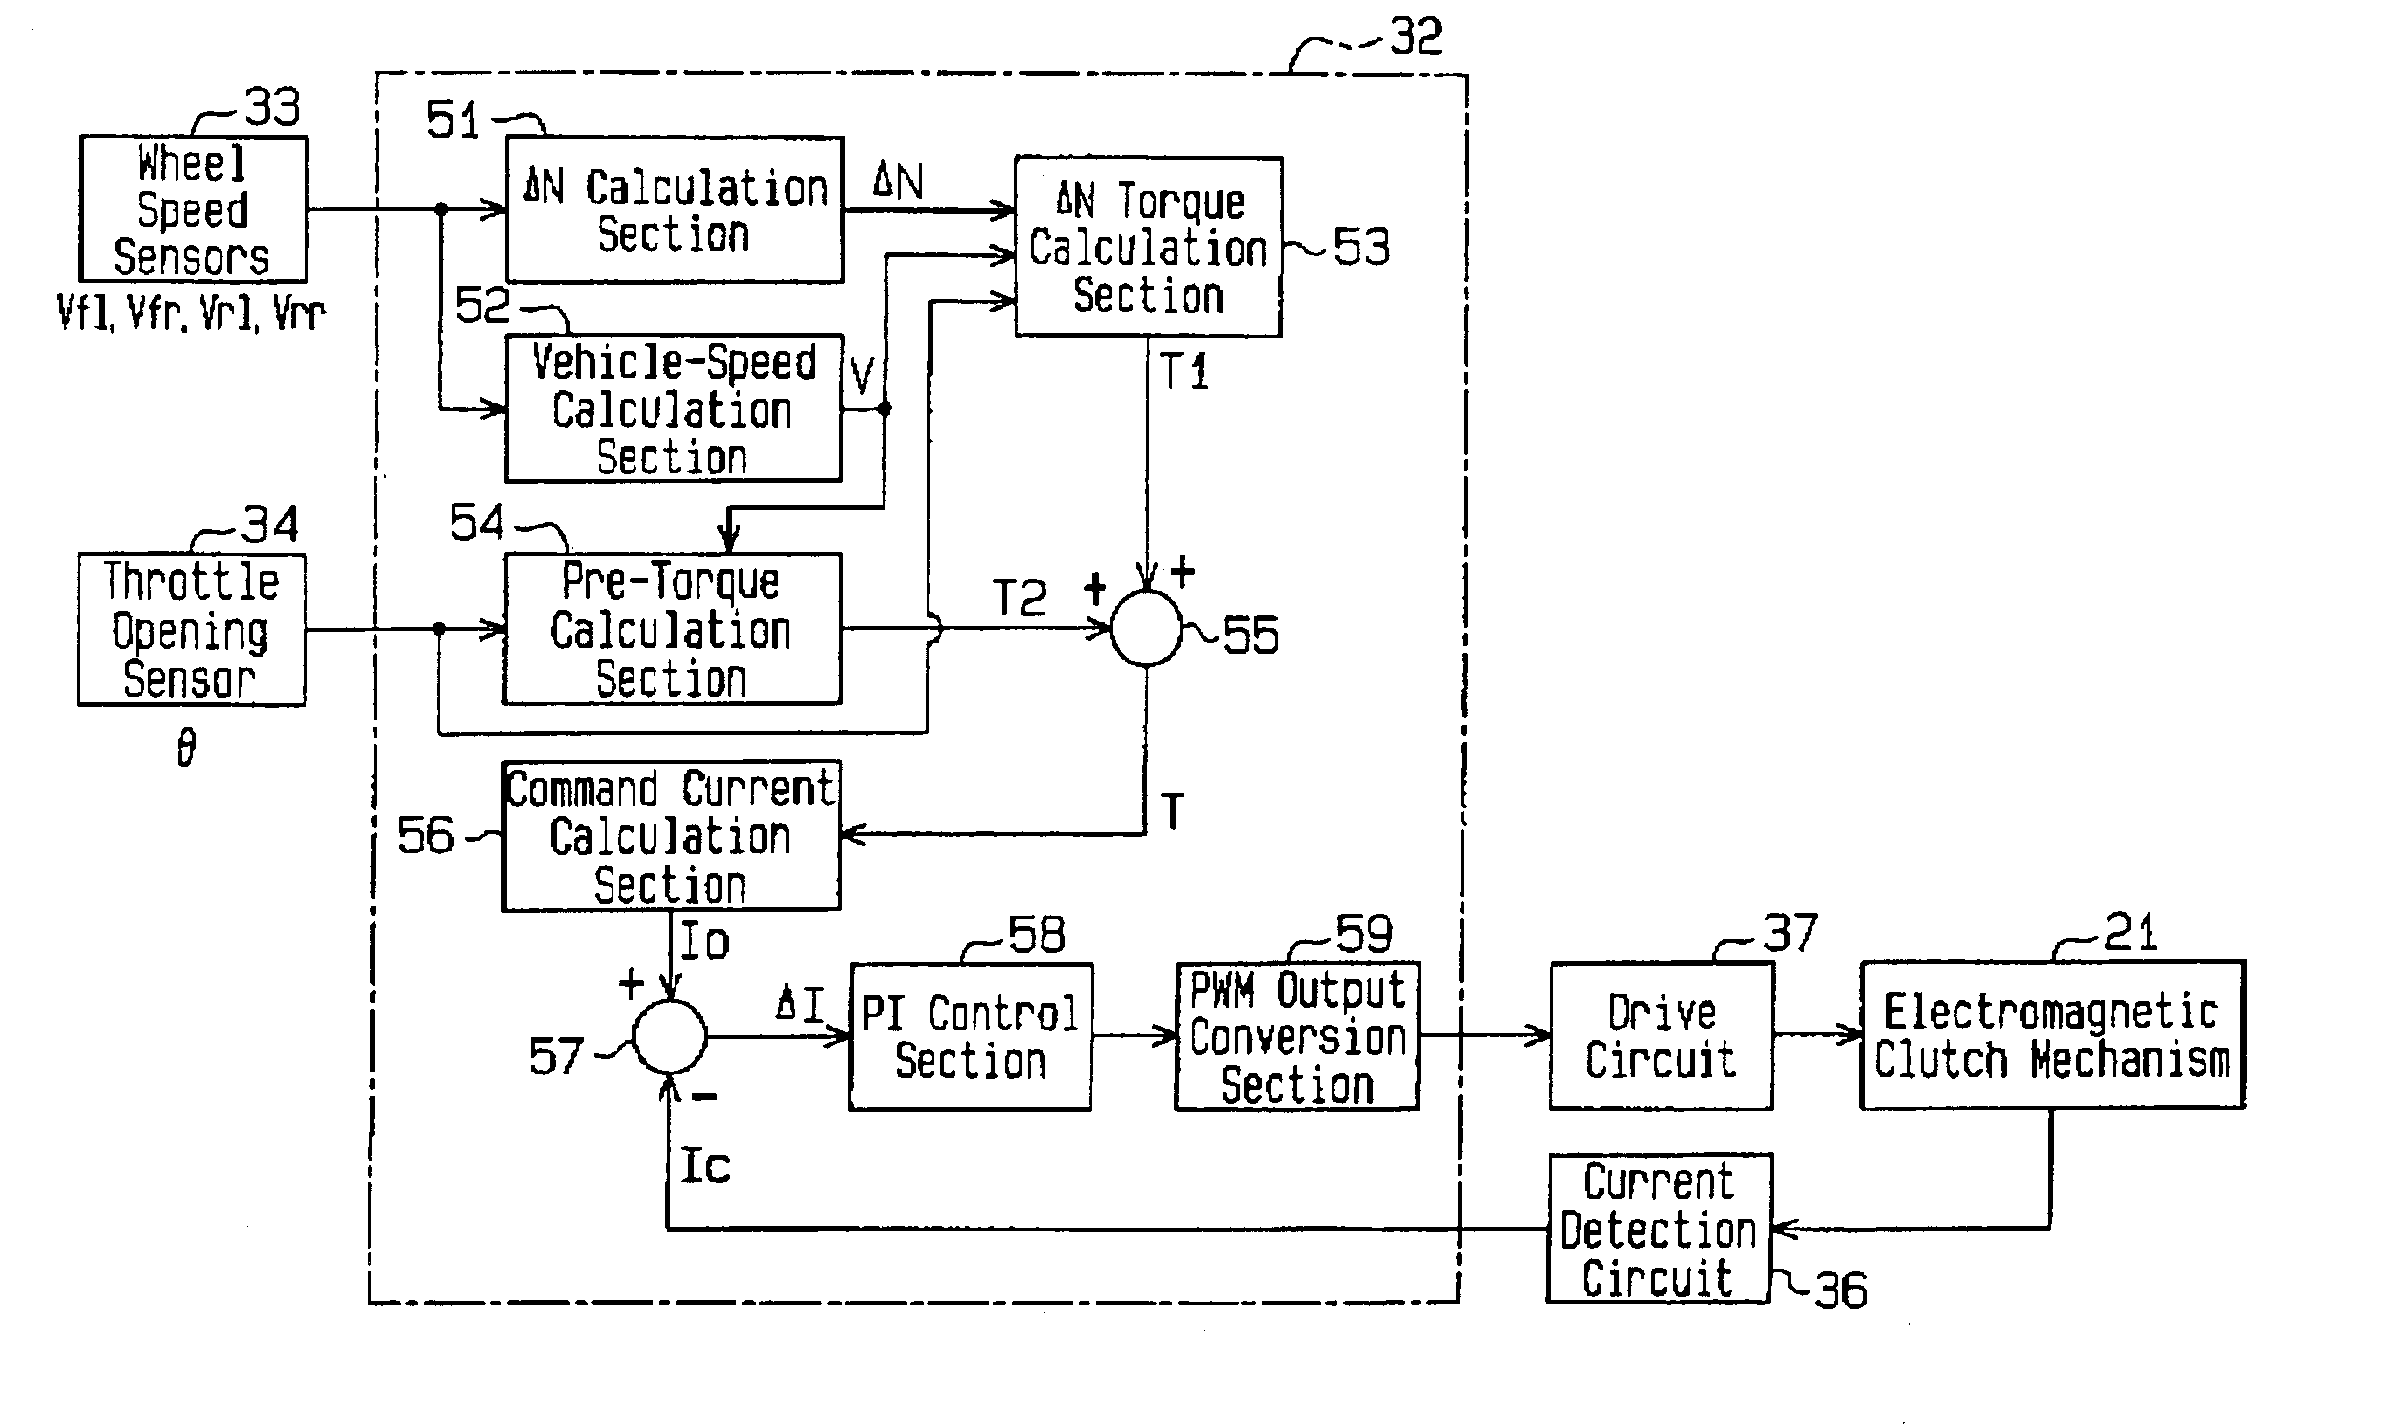 Drive-force distribution controller and drive-force distribution method for four-wheel-drive vehicle